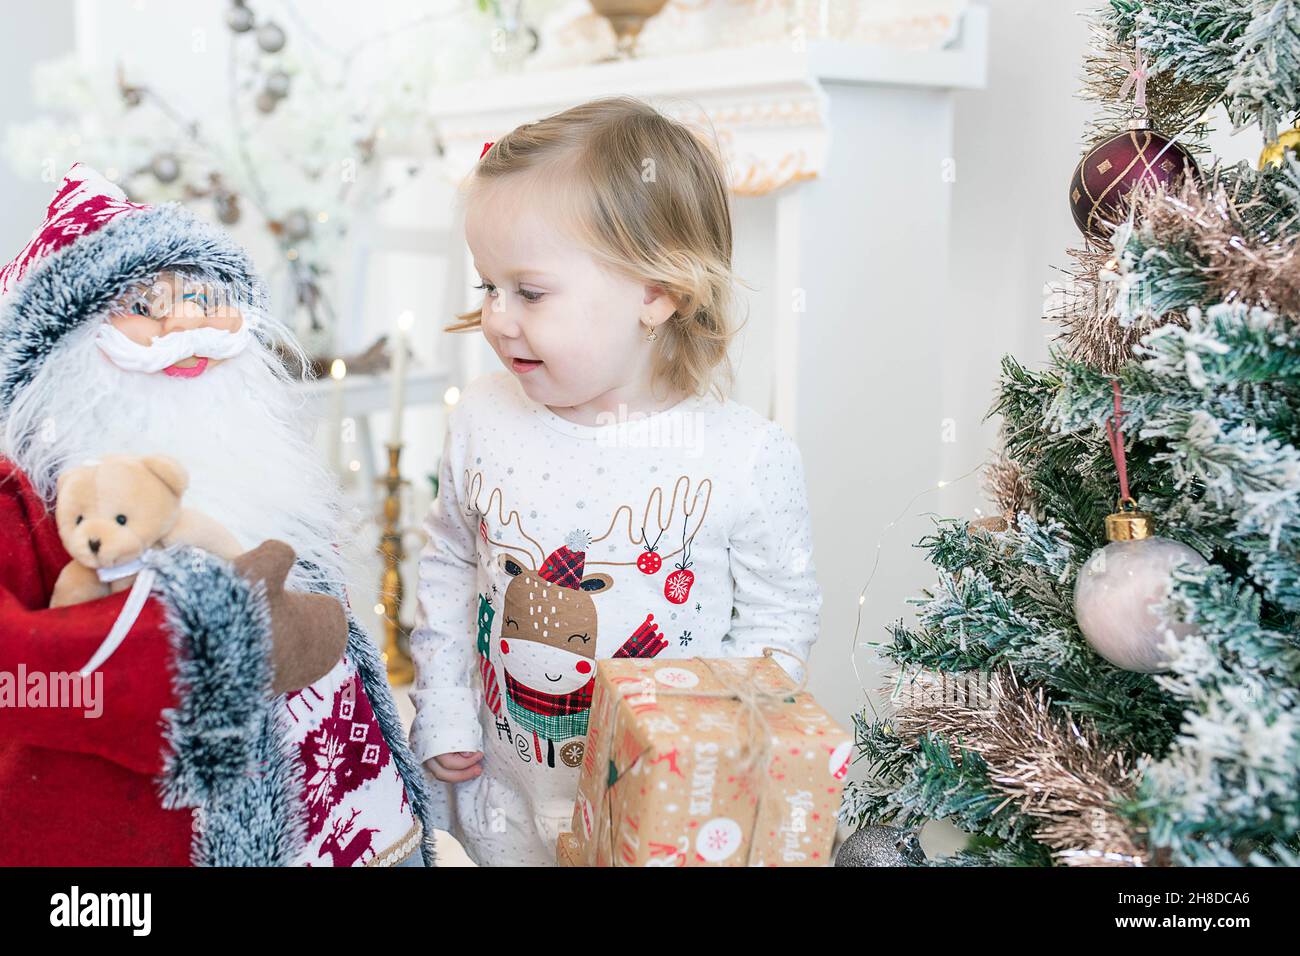 Adorable blonde little girl wearing festive pajamas while smiling and playing with the multitude of toys surrounding the decorated Christmas tree Stock Photo